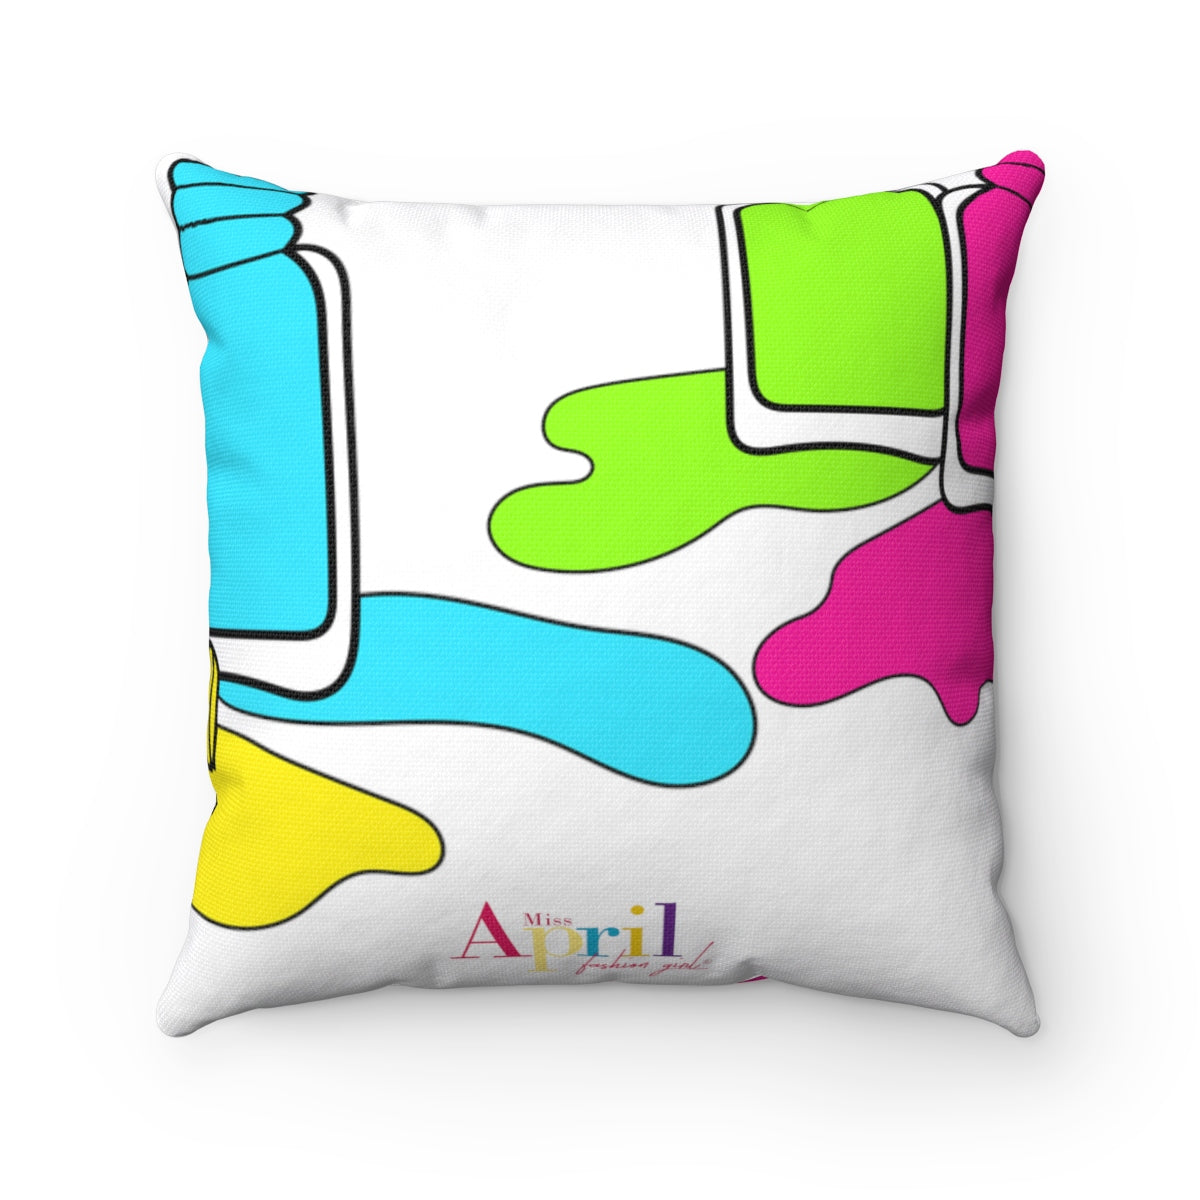 NAILED IT! Square Pillow Case